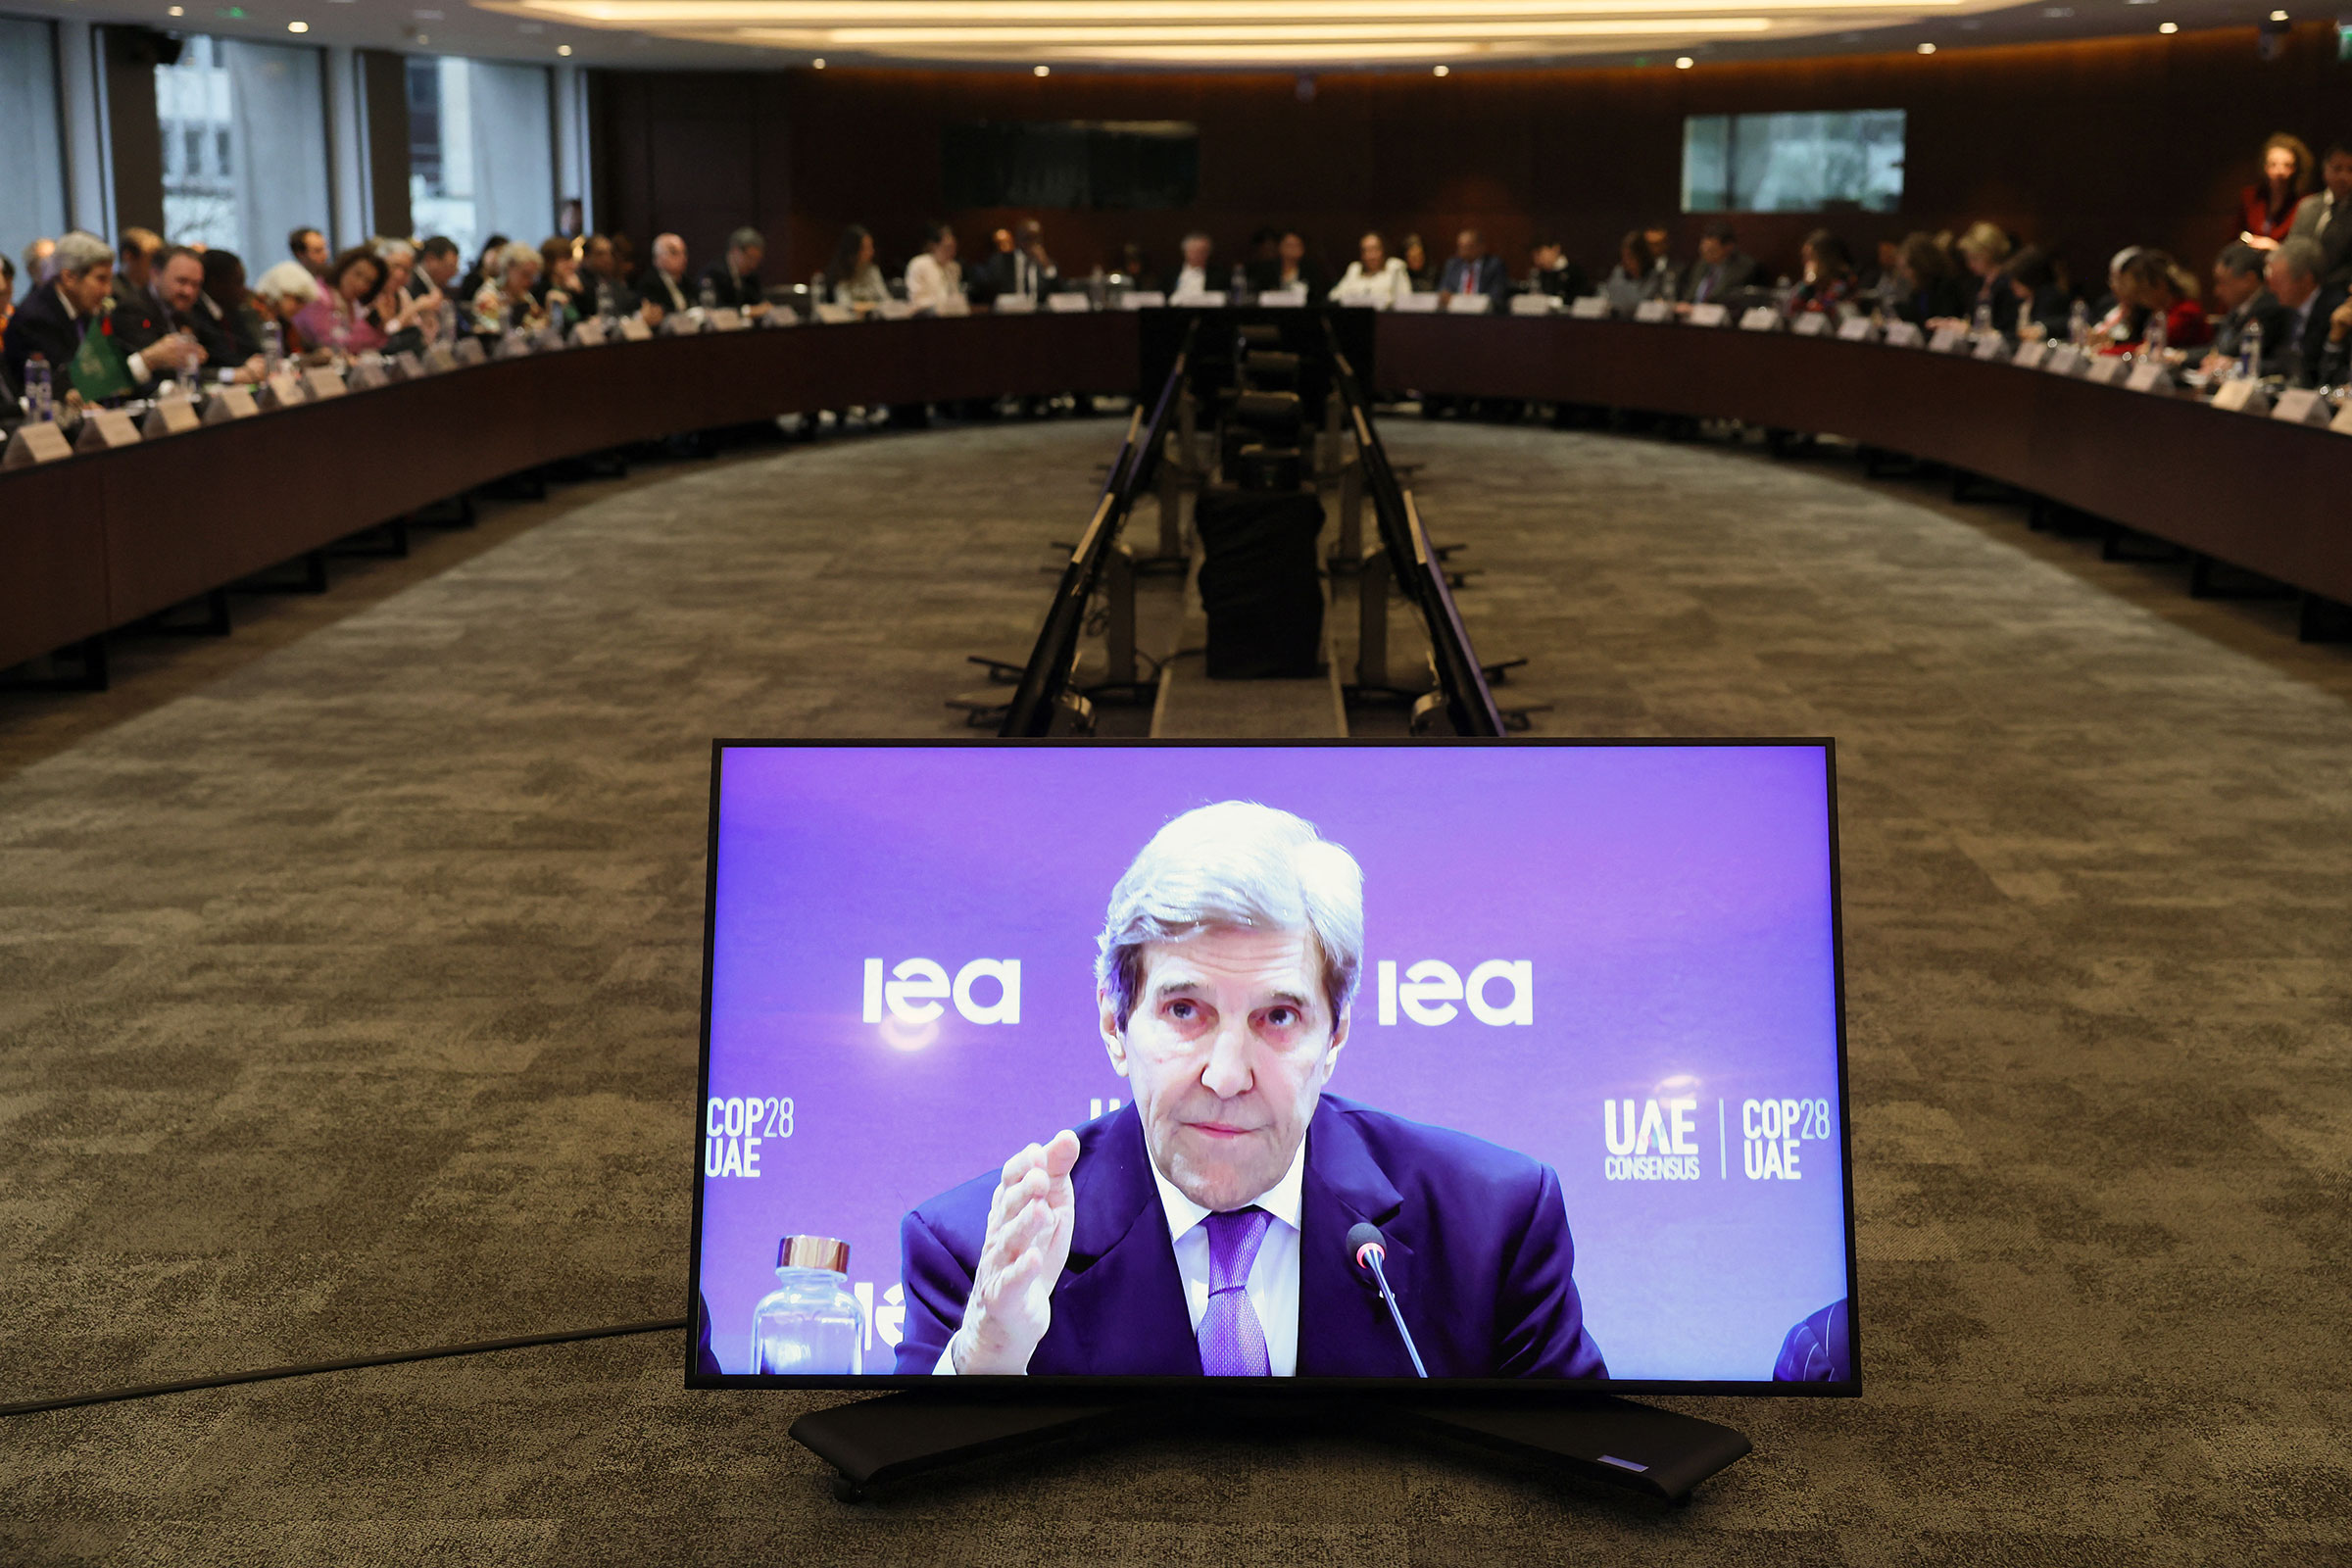 John Kerry is seen on a screen as he speaks during a high-level round table on COP energy and climate commitments organized by the International Energy Agency at its headquarters in Paris on Feb. 20, 2024.